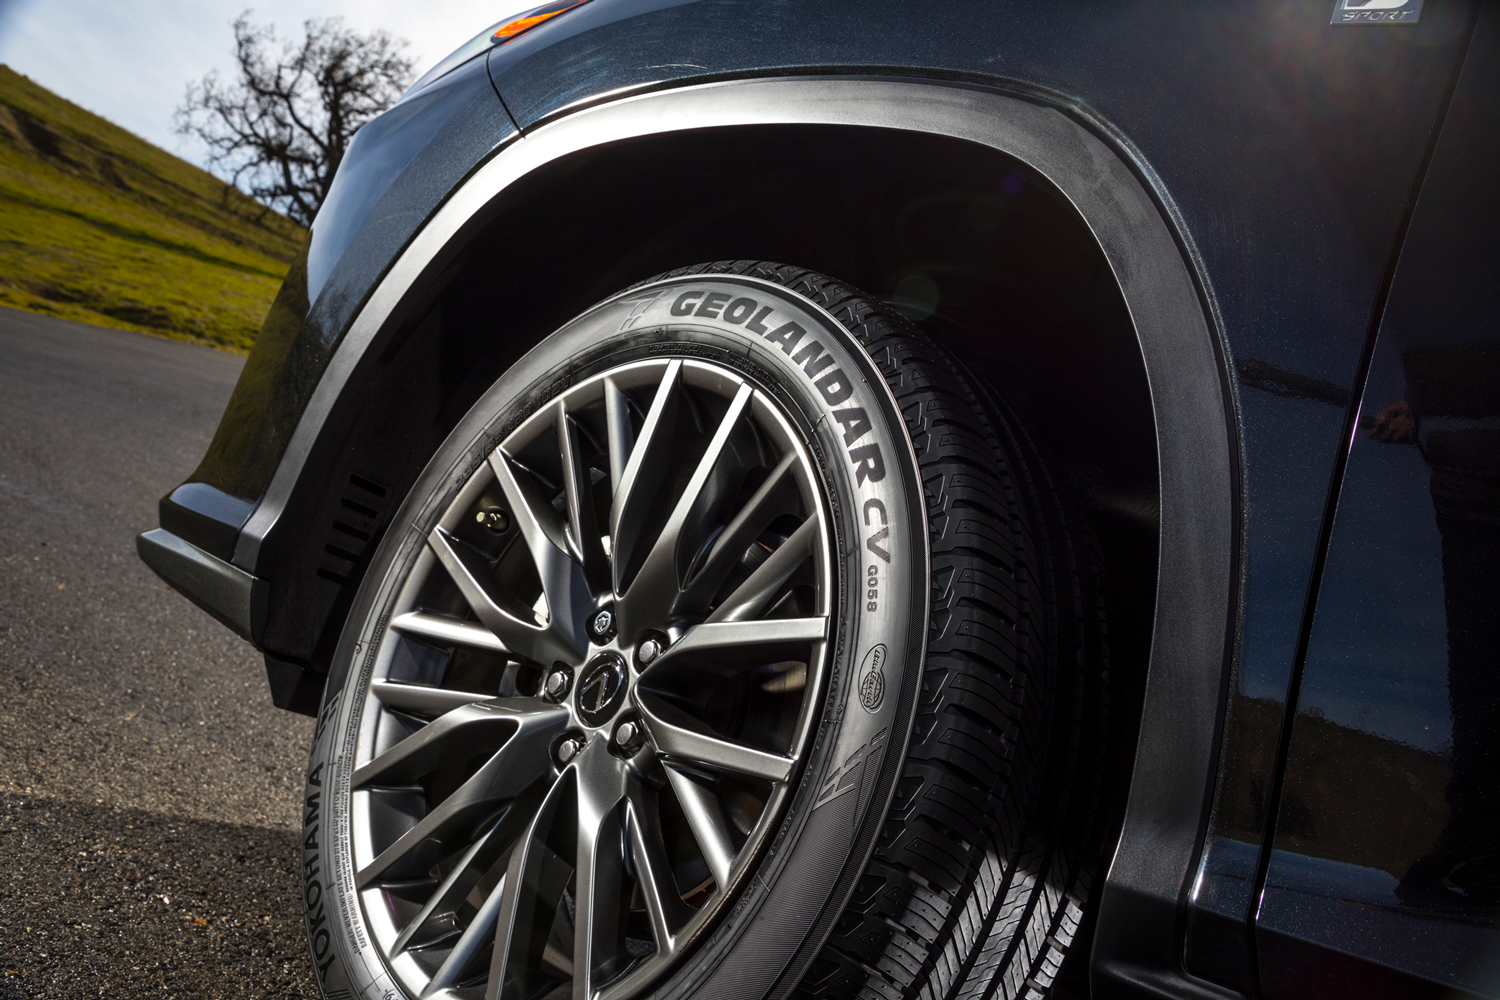 Yokohama Tire’s Brand New GEOLANDAR CV G058 Offers Sure-Footed All-Season Traction For Crossovers, Small SUVs And Minivans With 60-Day Risk-Free Trial; Now Eligible For $70 Spring 2021 Rebate